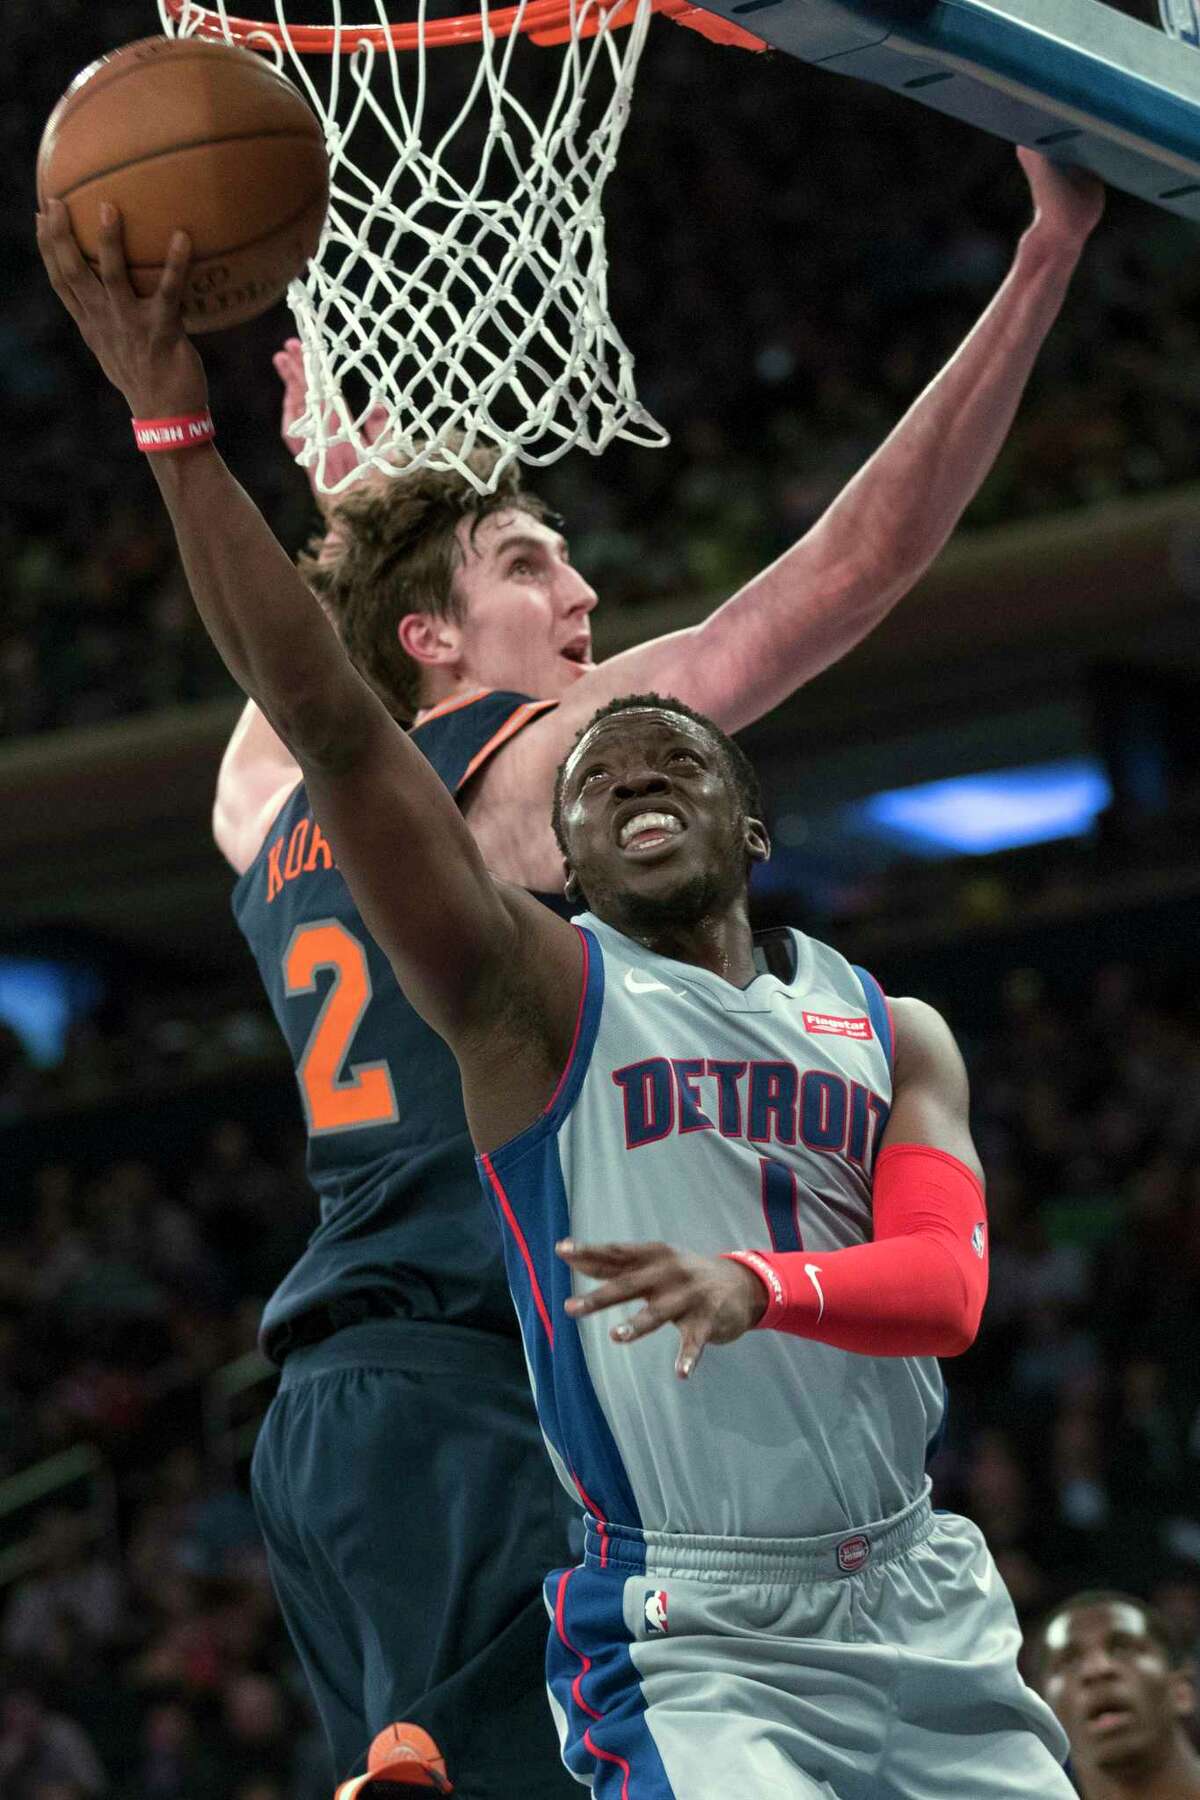 Detroit Pistons guard Reggie Jackson (1) goes to the basket past New York Knicks forward Luke Kornet (2) during the first half of an NBA basketball game Saturday, March 31, 2018, at Madison Square Garden in New York. (AP Photo/Mary Altaffer)